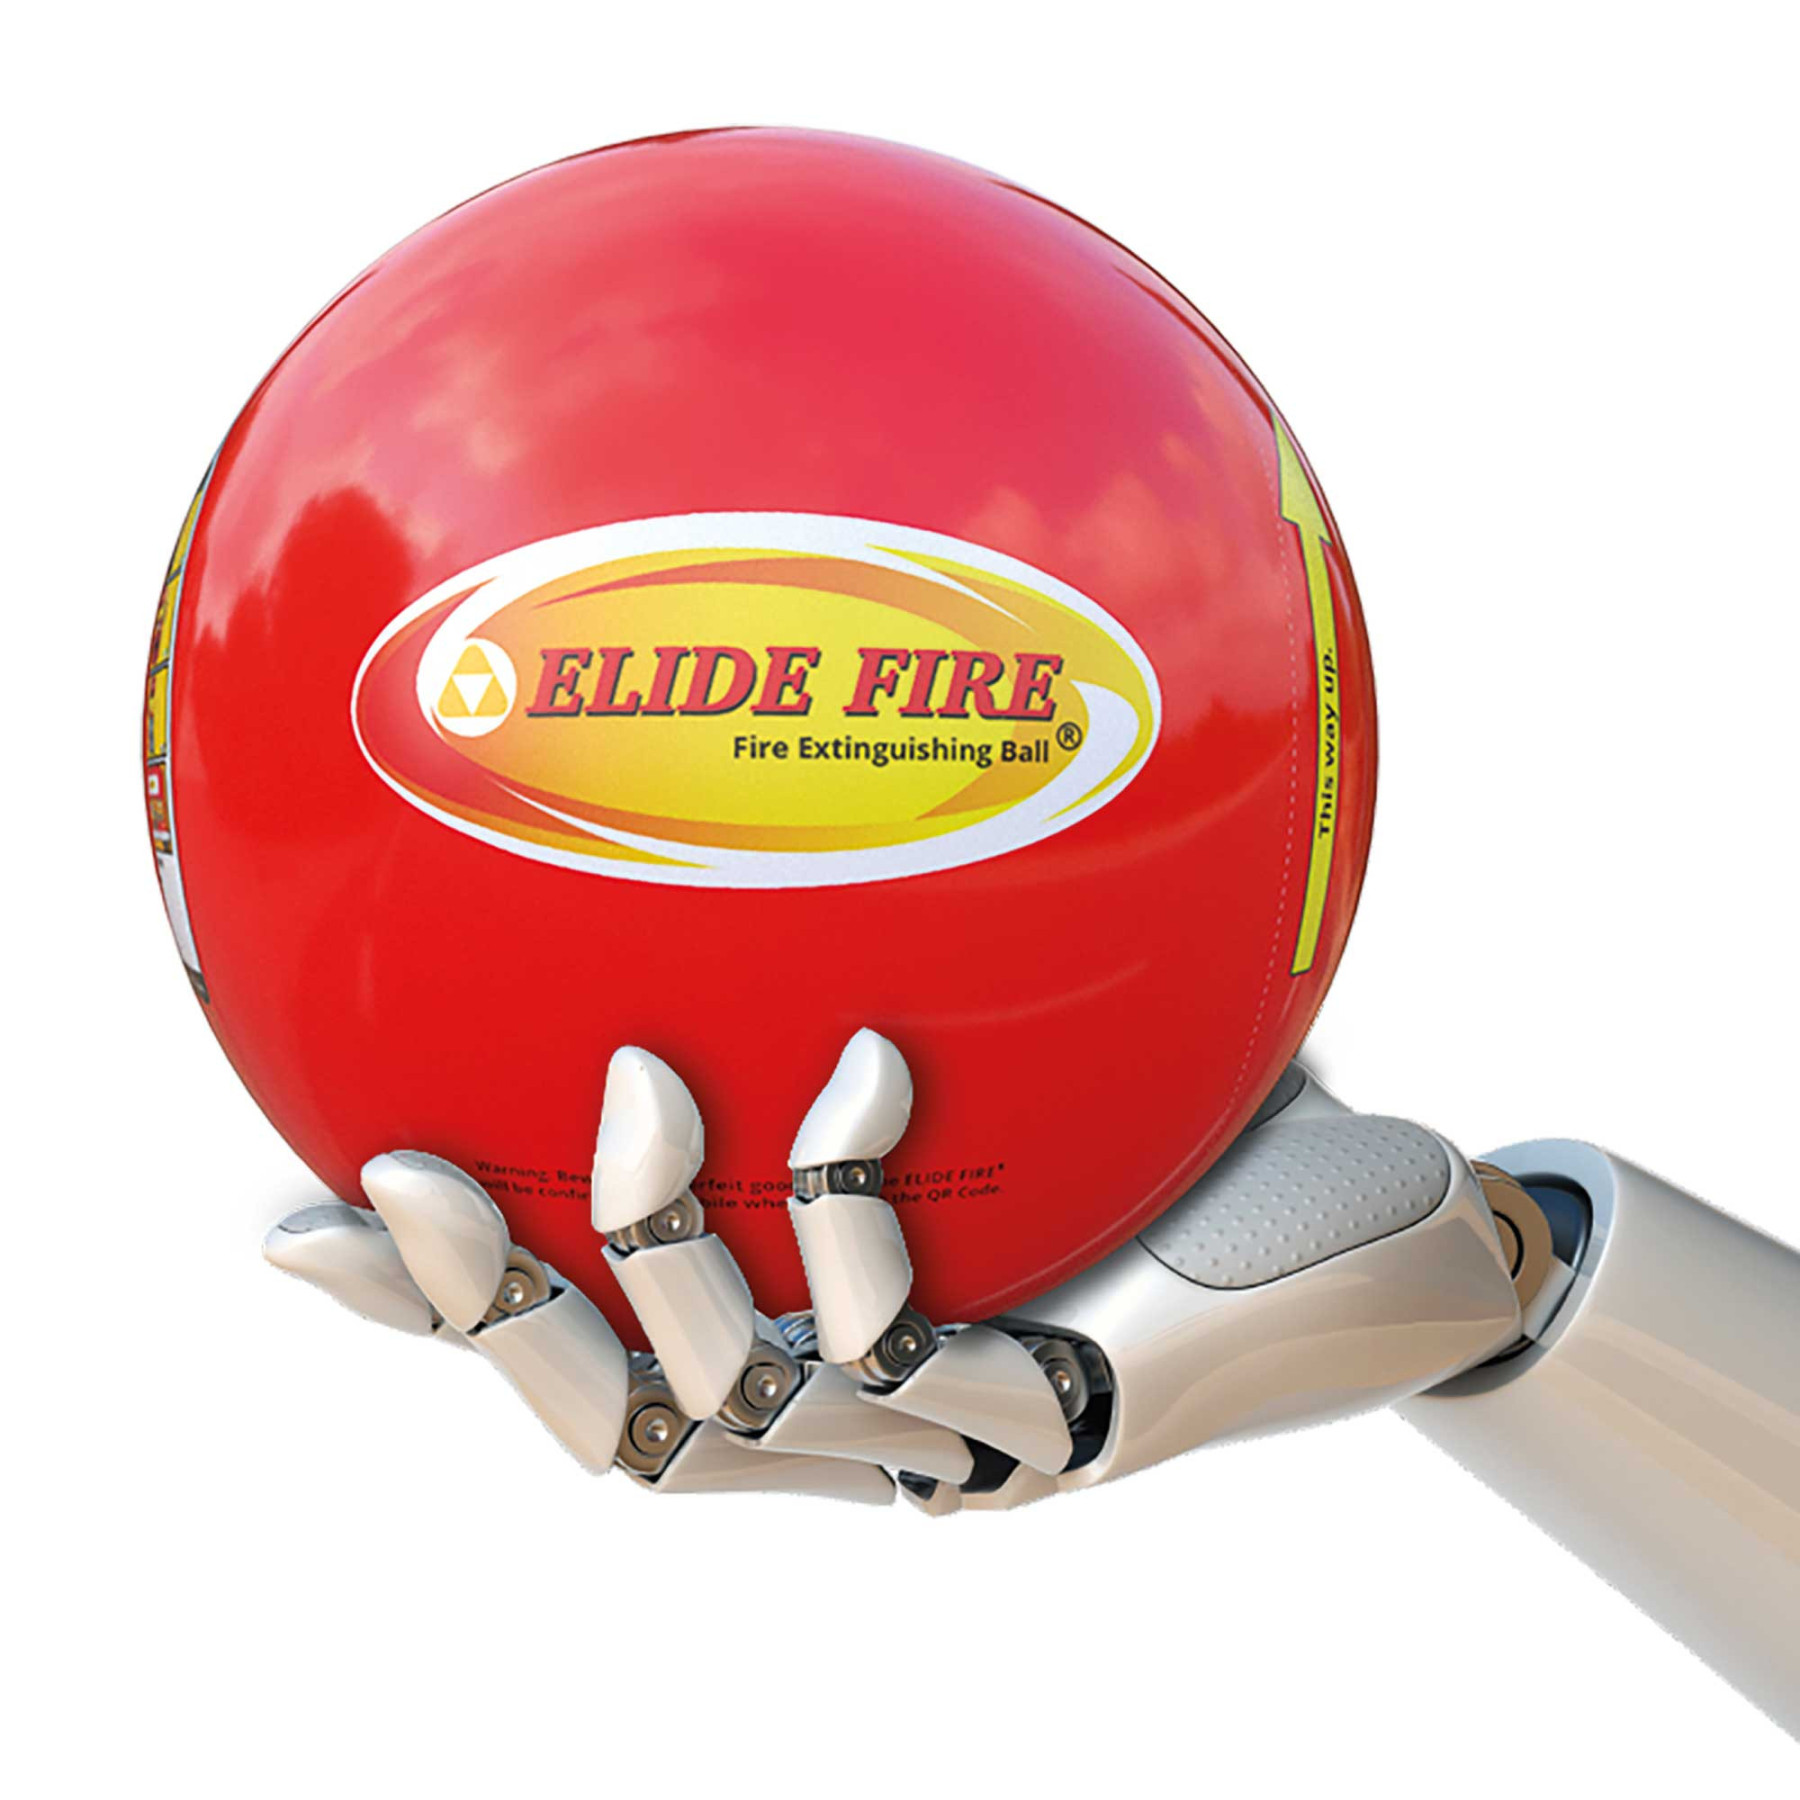 ELIDE FIRE 4 In. Self Activating Fire Extinguisher Ball, ELY4 at